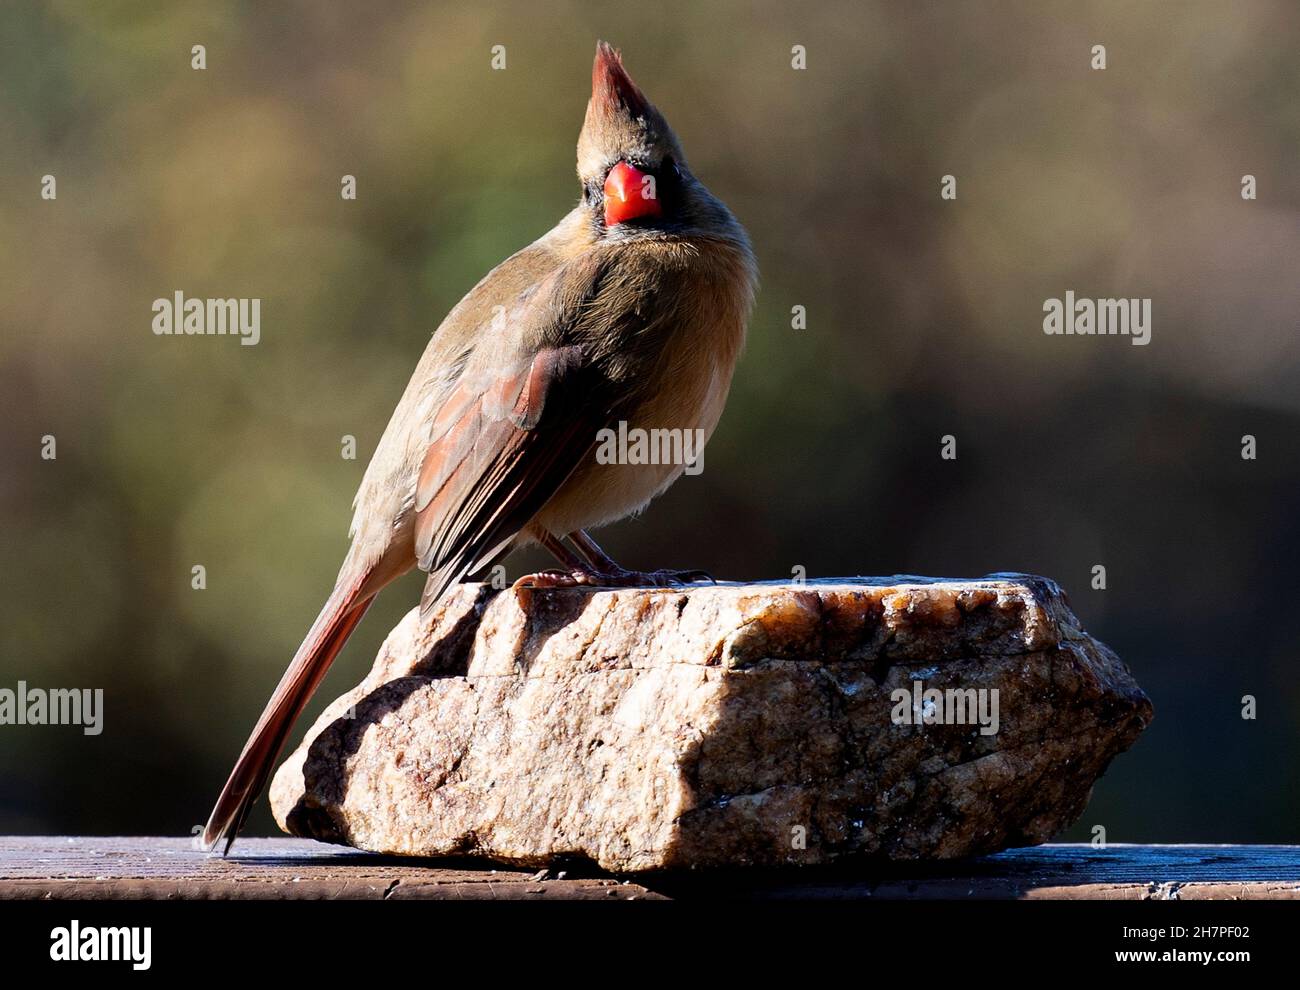 Female Northern Cardinal perched on a rock Stock Photo